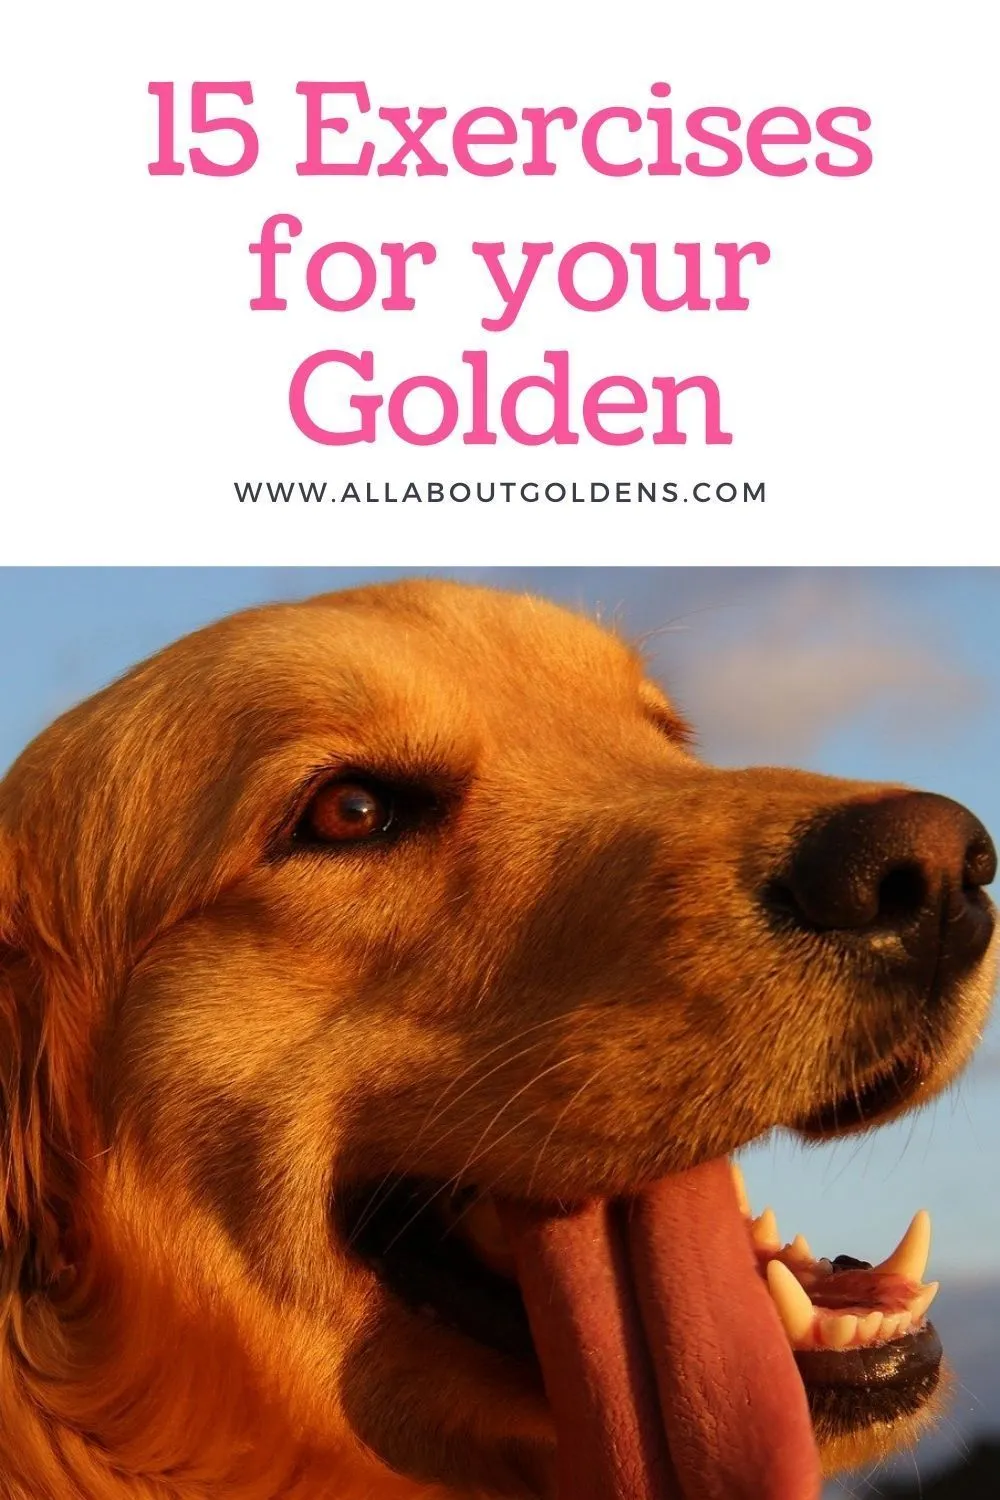 How to Meet Your Golden Retriever’s Exercise Needs: A Guide for New Dog Owners